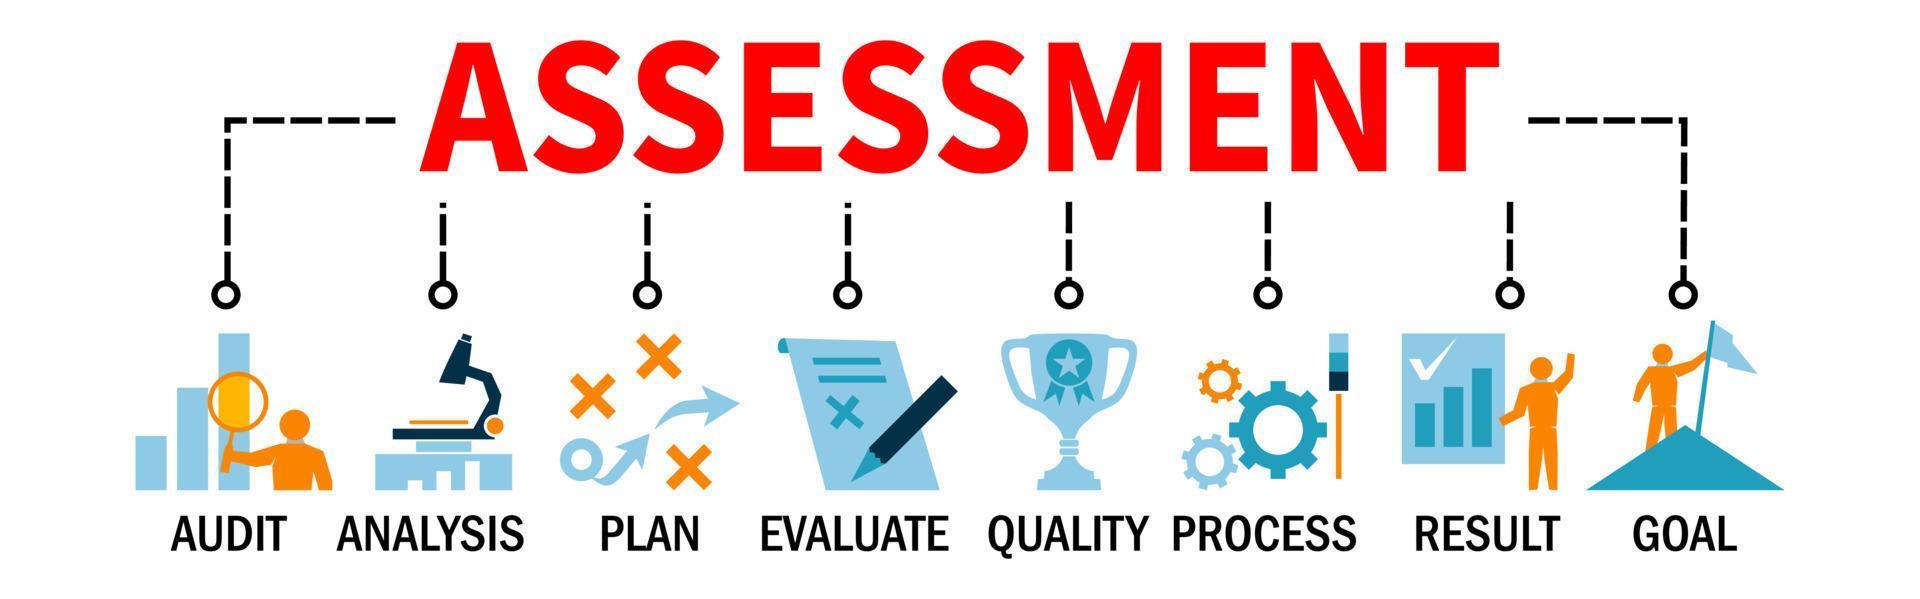 Assess. Assessment Banner Vector Illustration providing the assess systems for process planning evaluate audit and analyse Business with icons